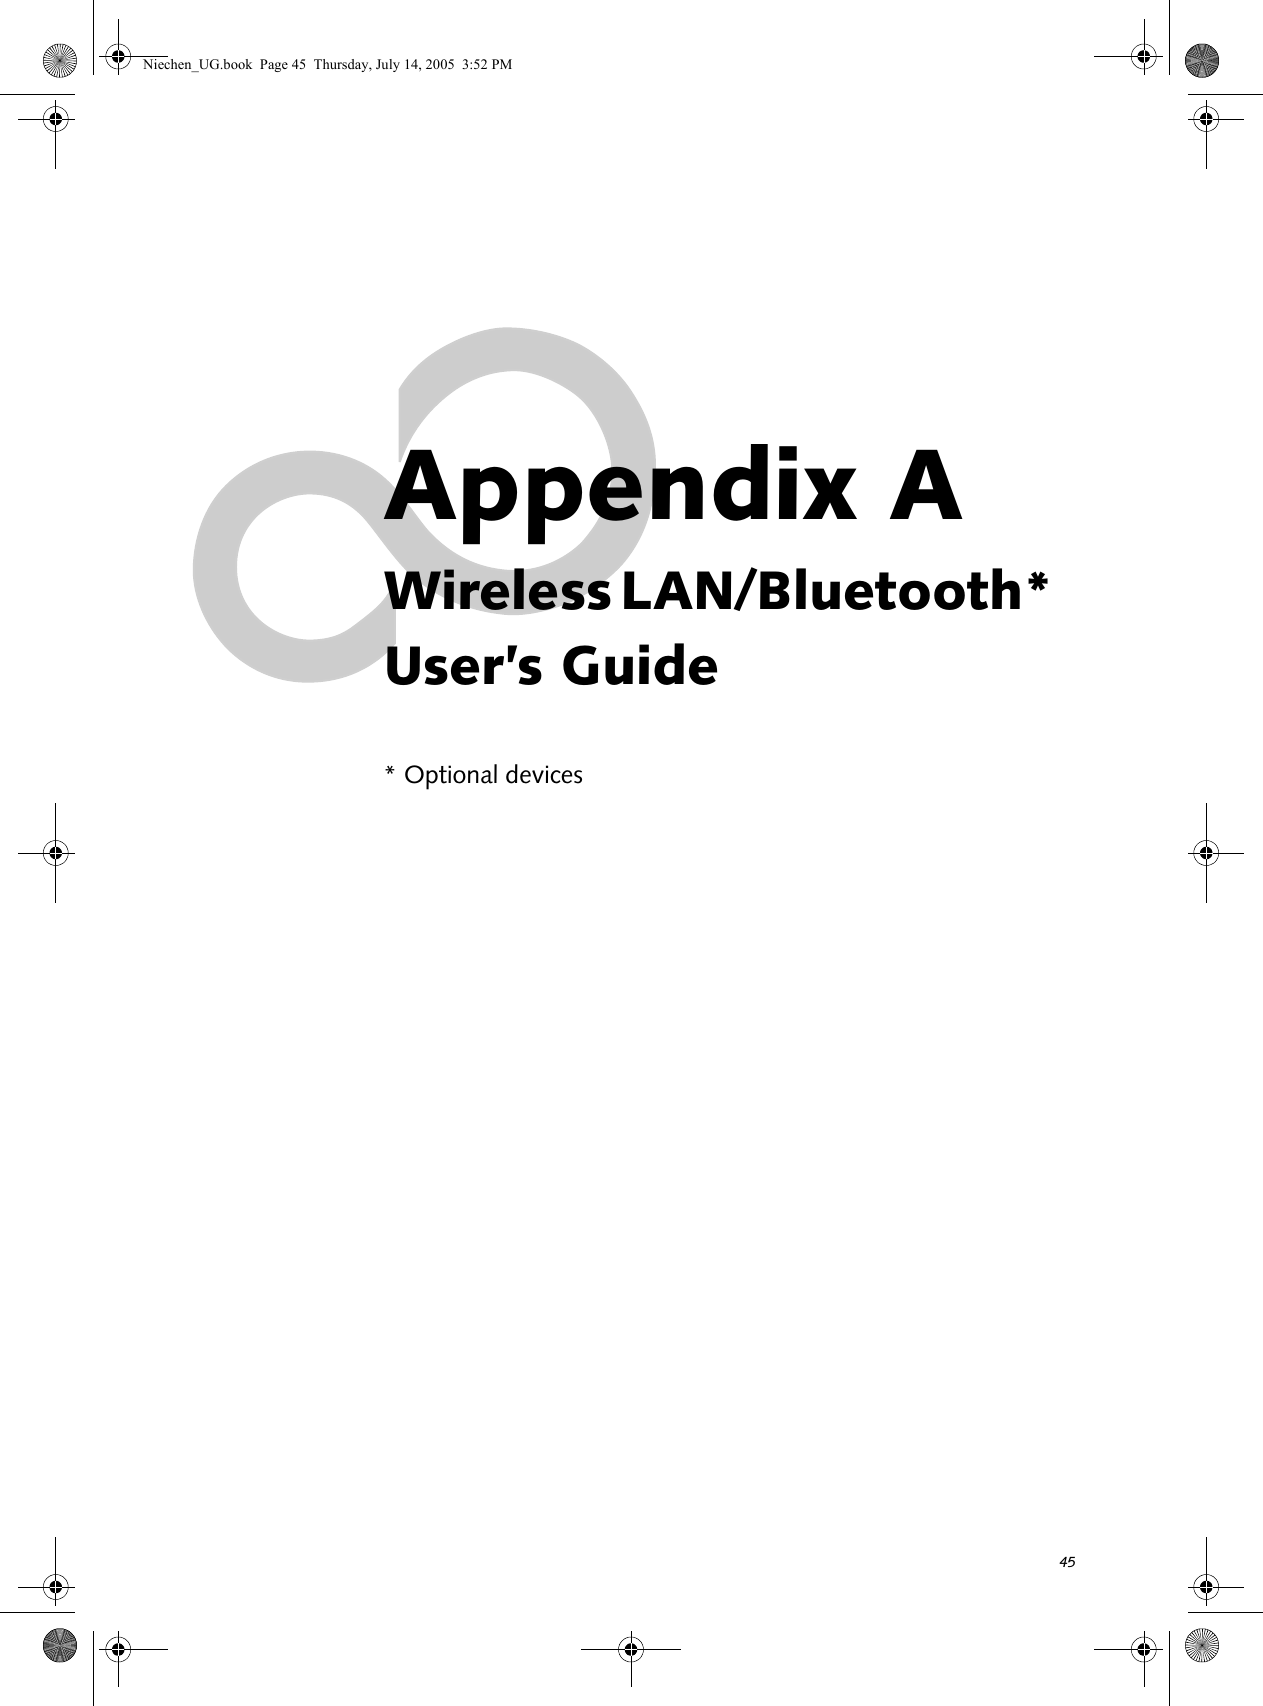 45Appendix AWireless LAN/Bluetooth* User’s Guide* Optional devicesNiechen_UG.book  Page 45  Thursday, July 14, 2005  3:52 PM